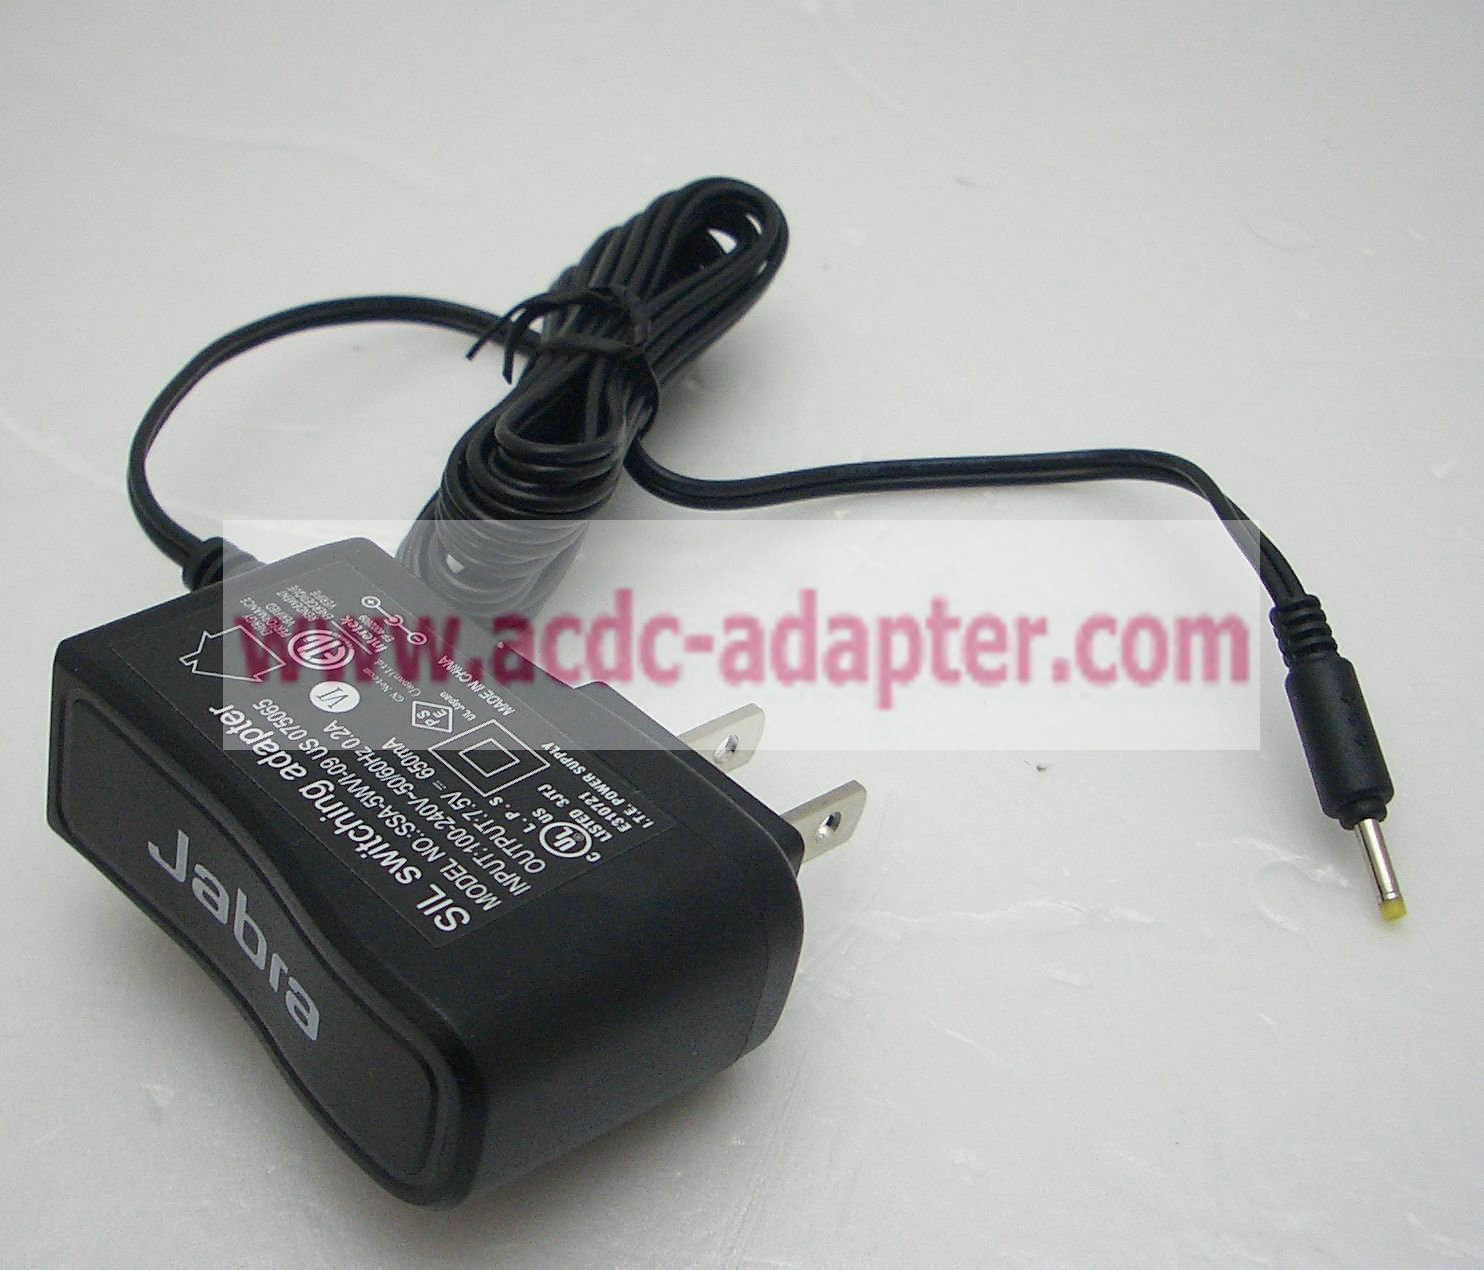 New SIL SSA-5WV1-09 US075065 5V 650mA AC Adapter for Jabra PRO 920 930 9450 9460